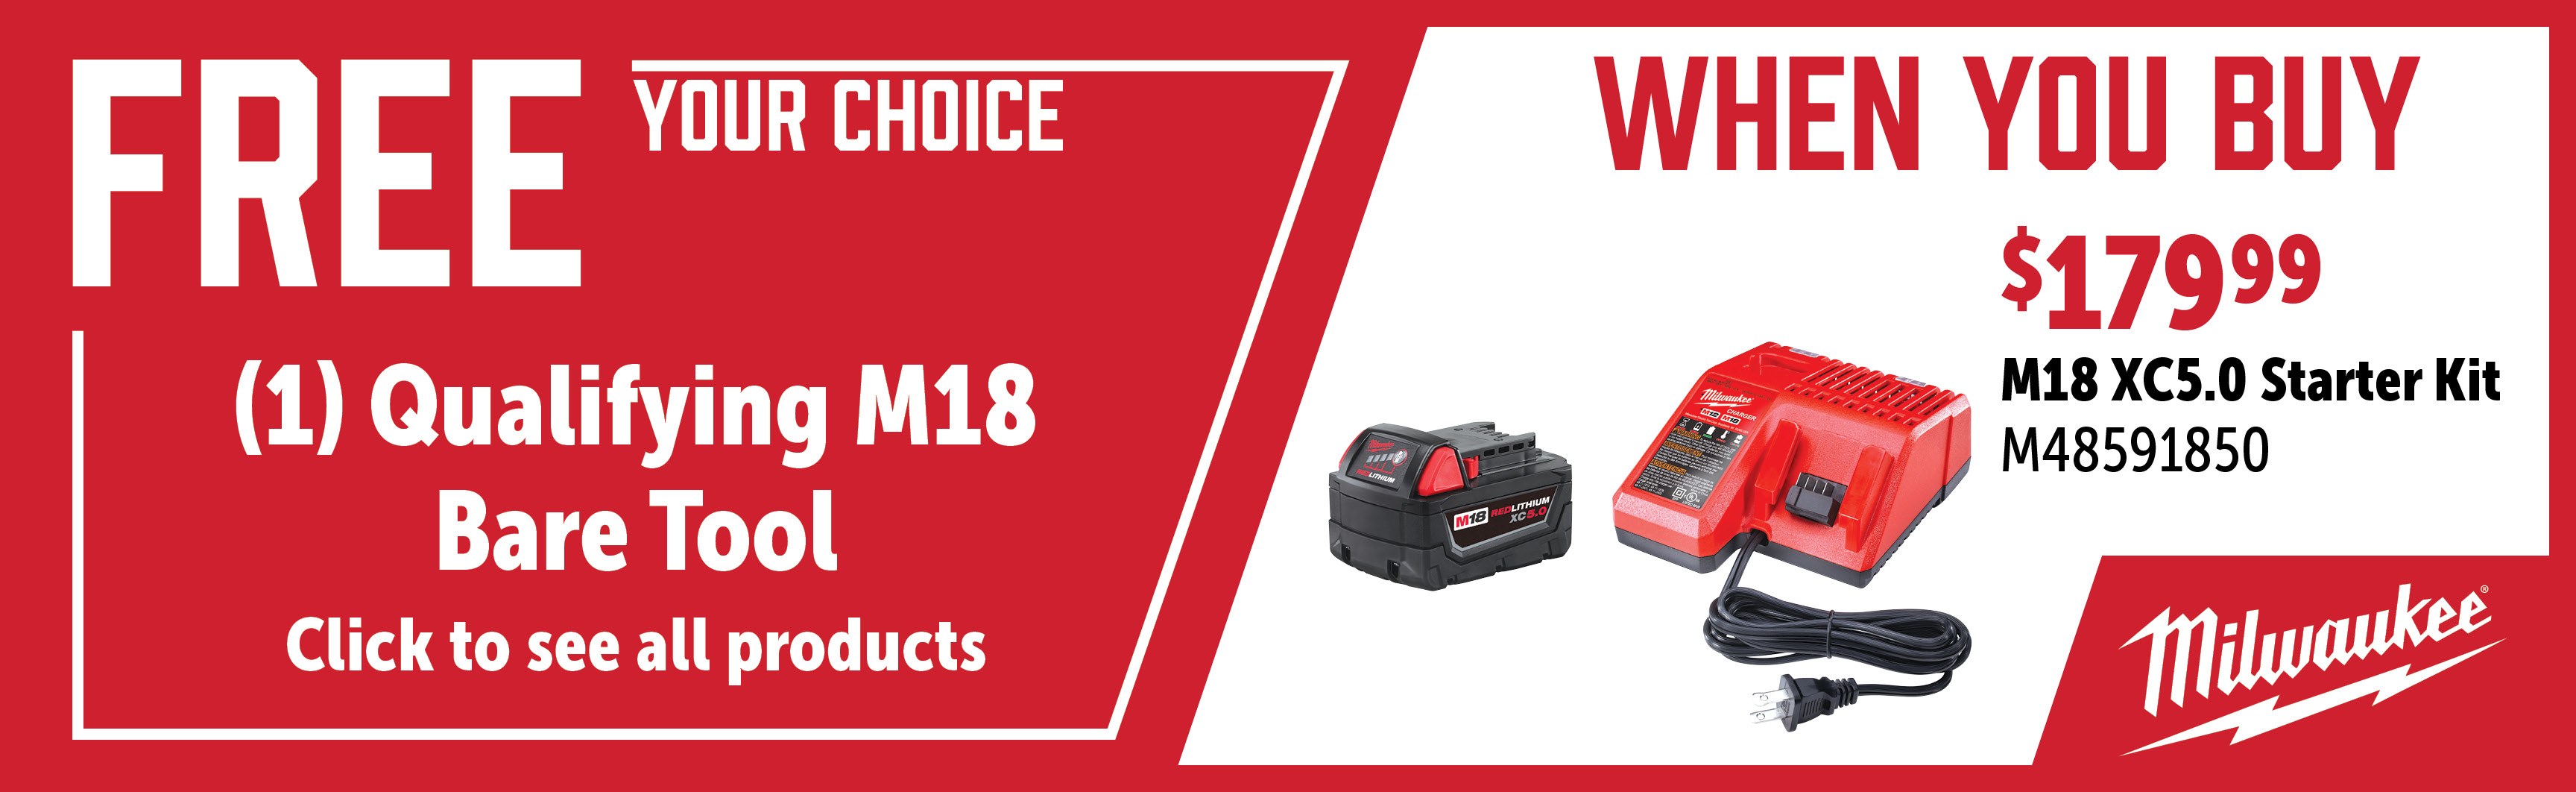 Milwaukee Feb-Apr: Buy an M48591850 and Get a Qualifying FREE M18 Bare Tool